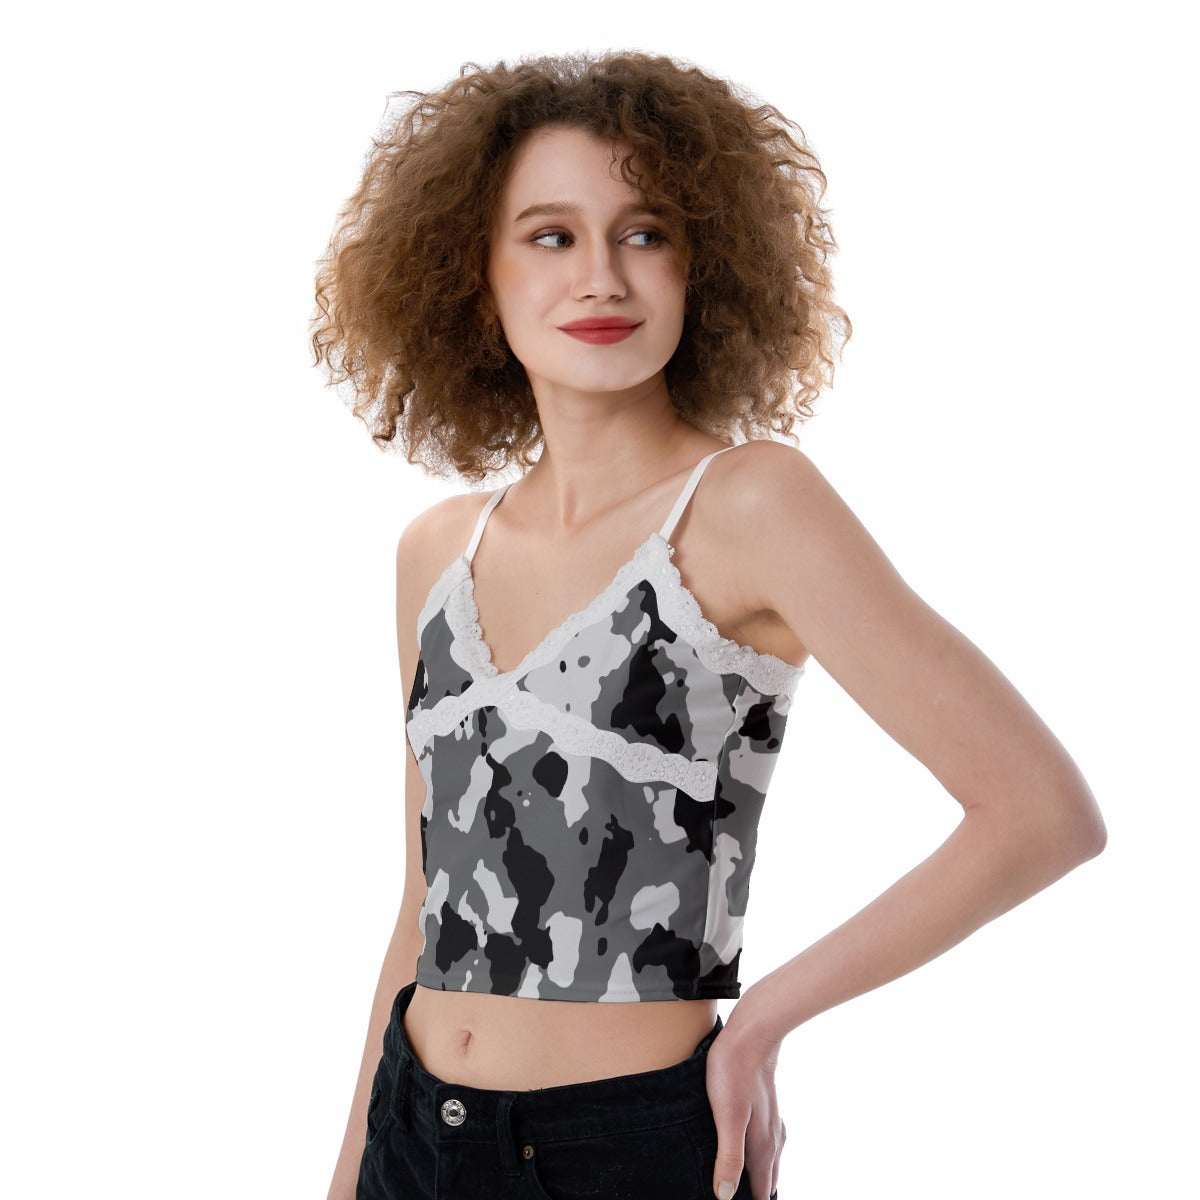 All-Over Print Women's Lace Camisole